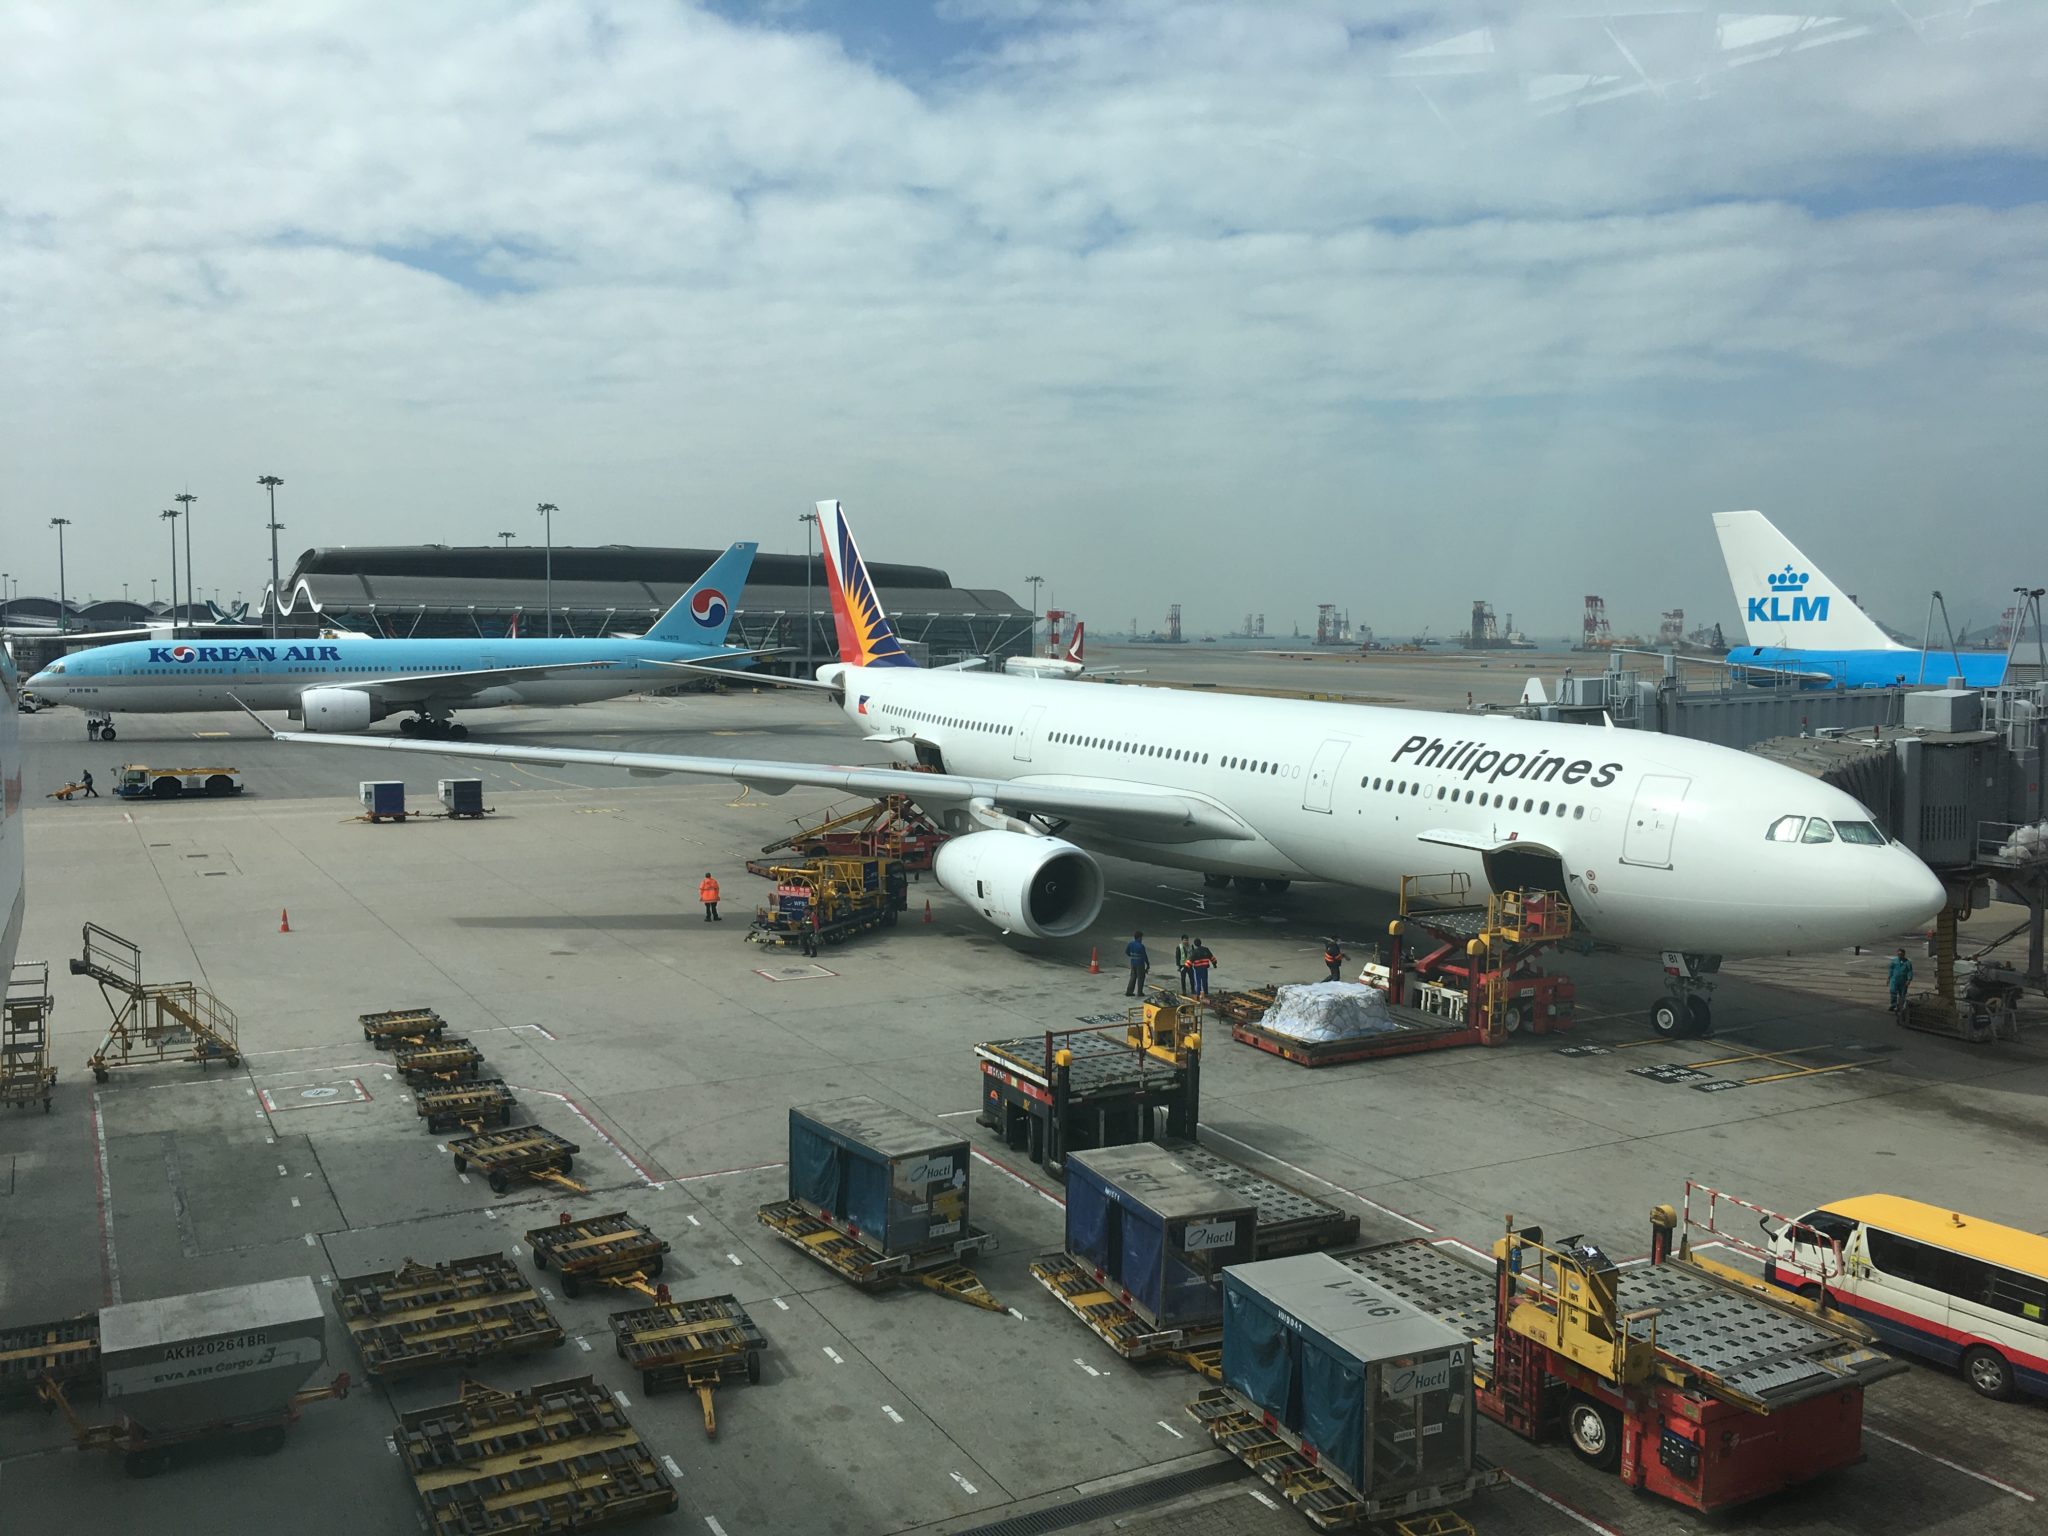 Our Philippine Airlines plane from the airport window